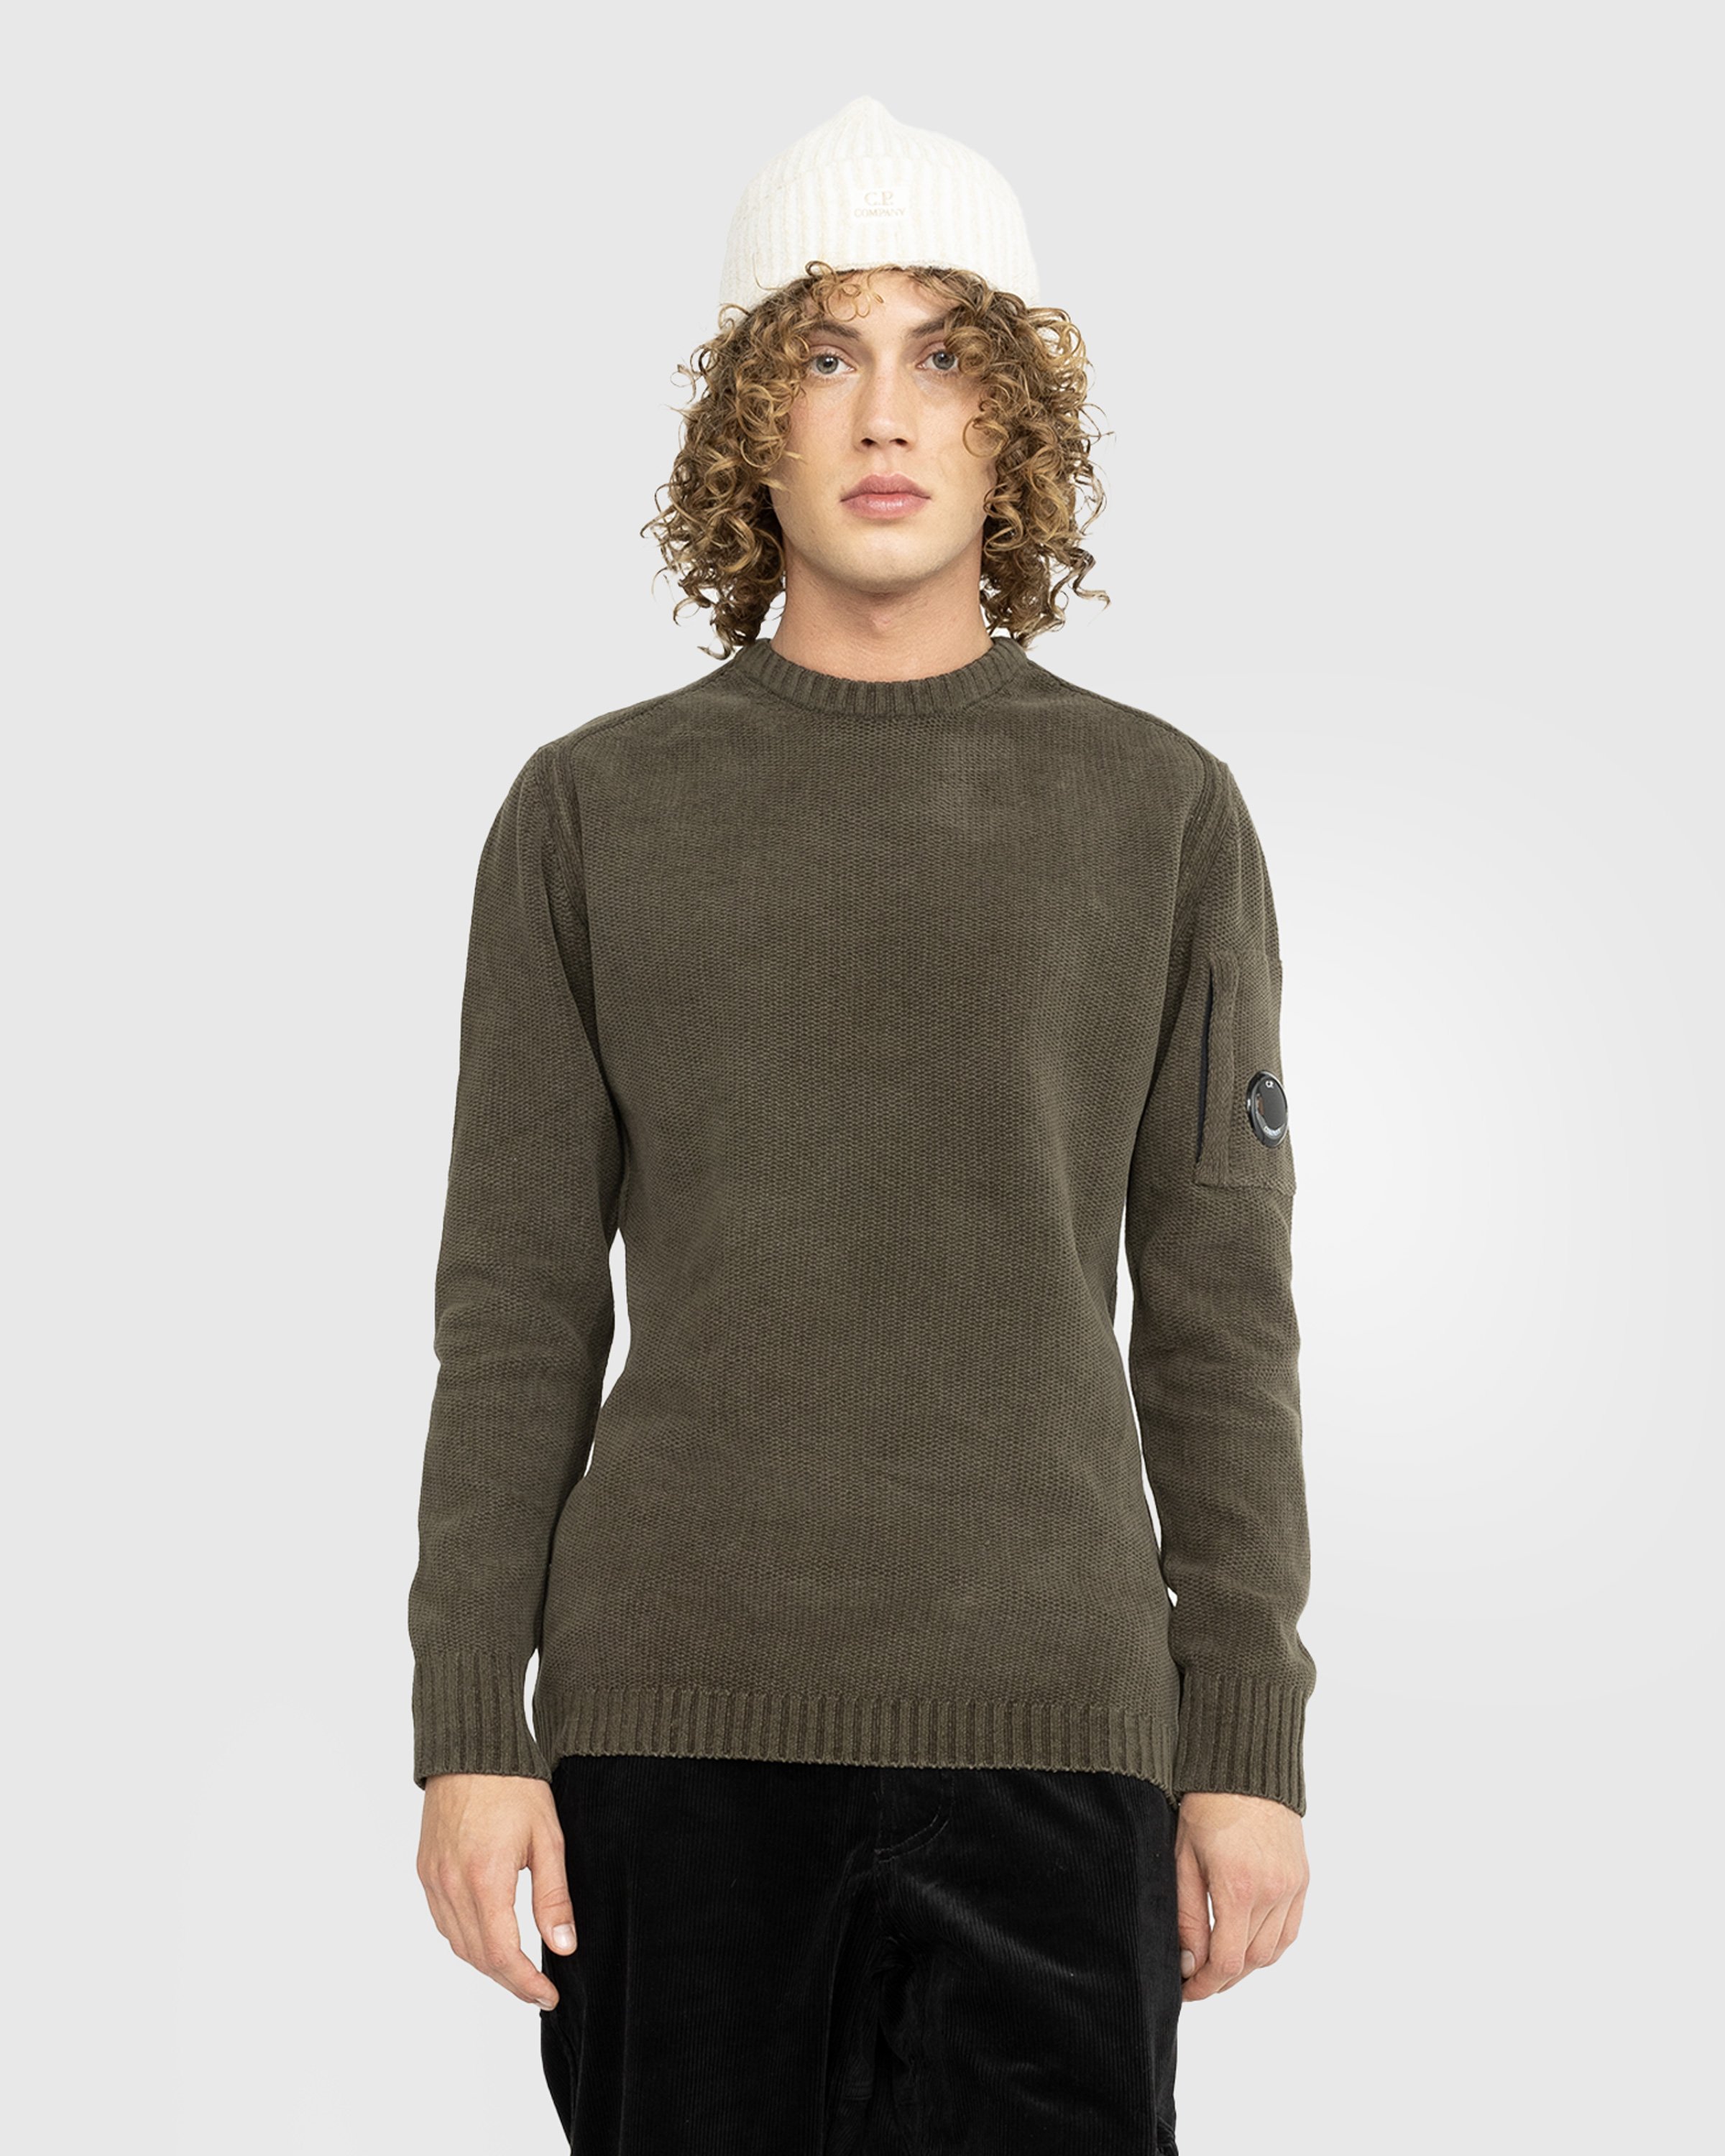 C.P. Company - Knit Cotton Jumper Olive Night - Clothing - Green - Image 2